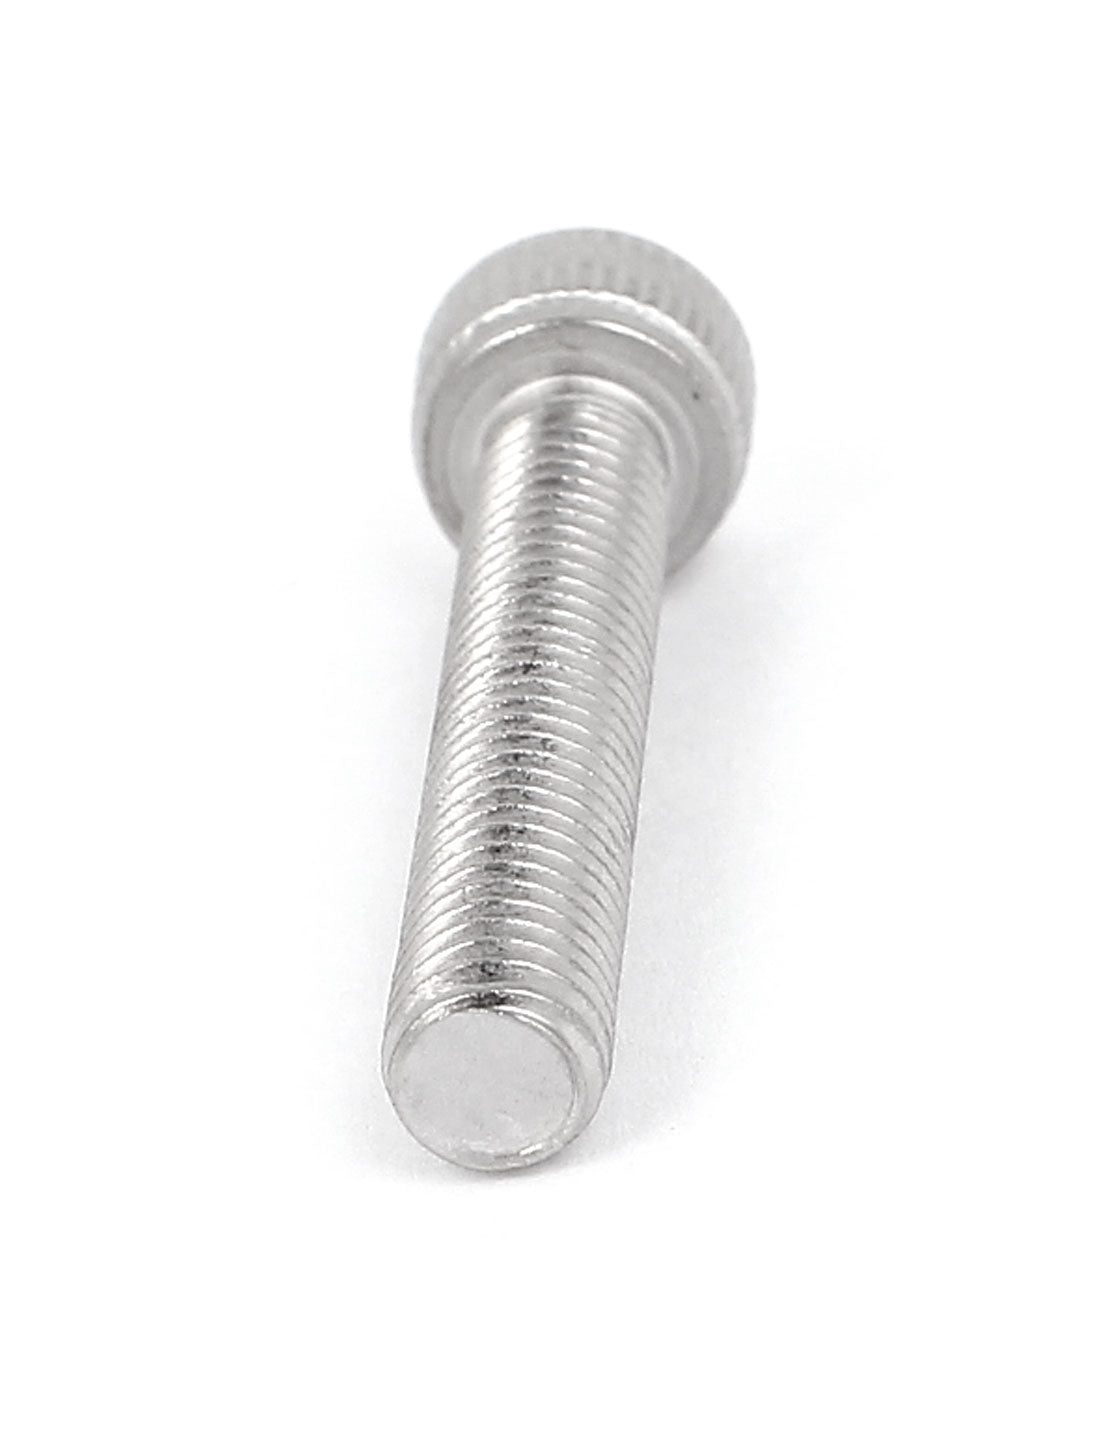 uxcell Uxcell 1mm Pitch M6x35mm Stainless Steel Hex Socket Head Cap Machine Screws Bolts 20pcs